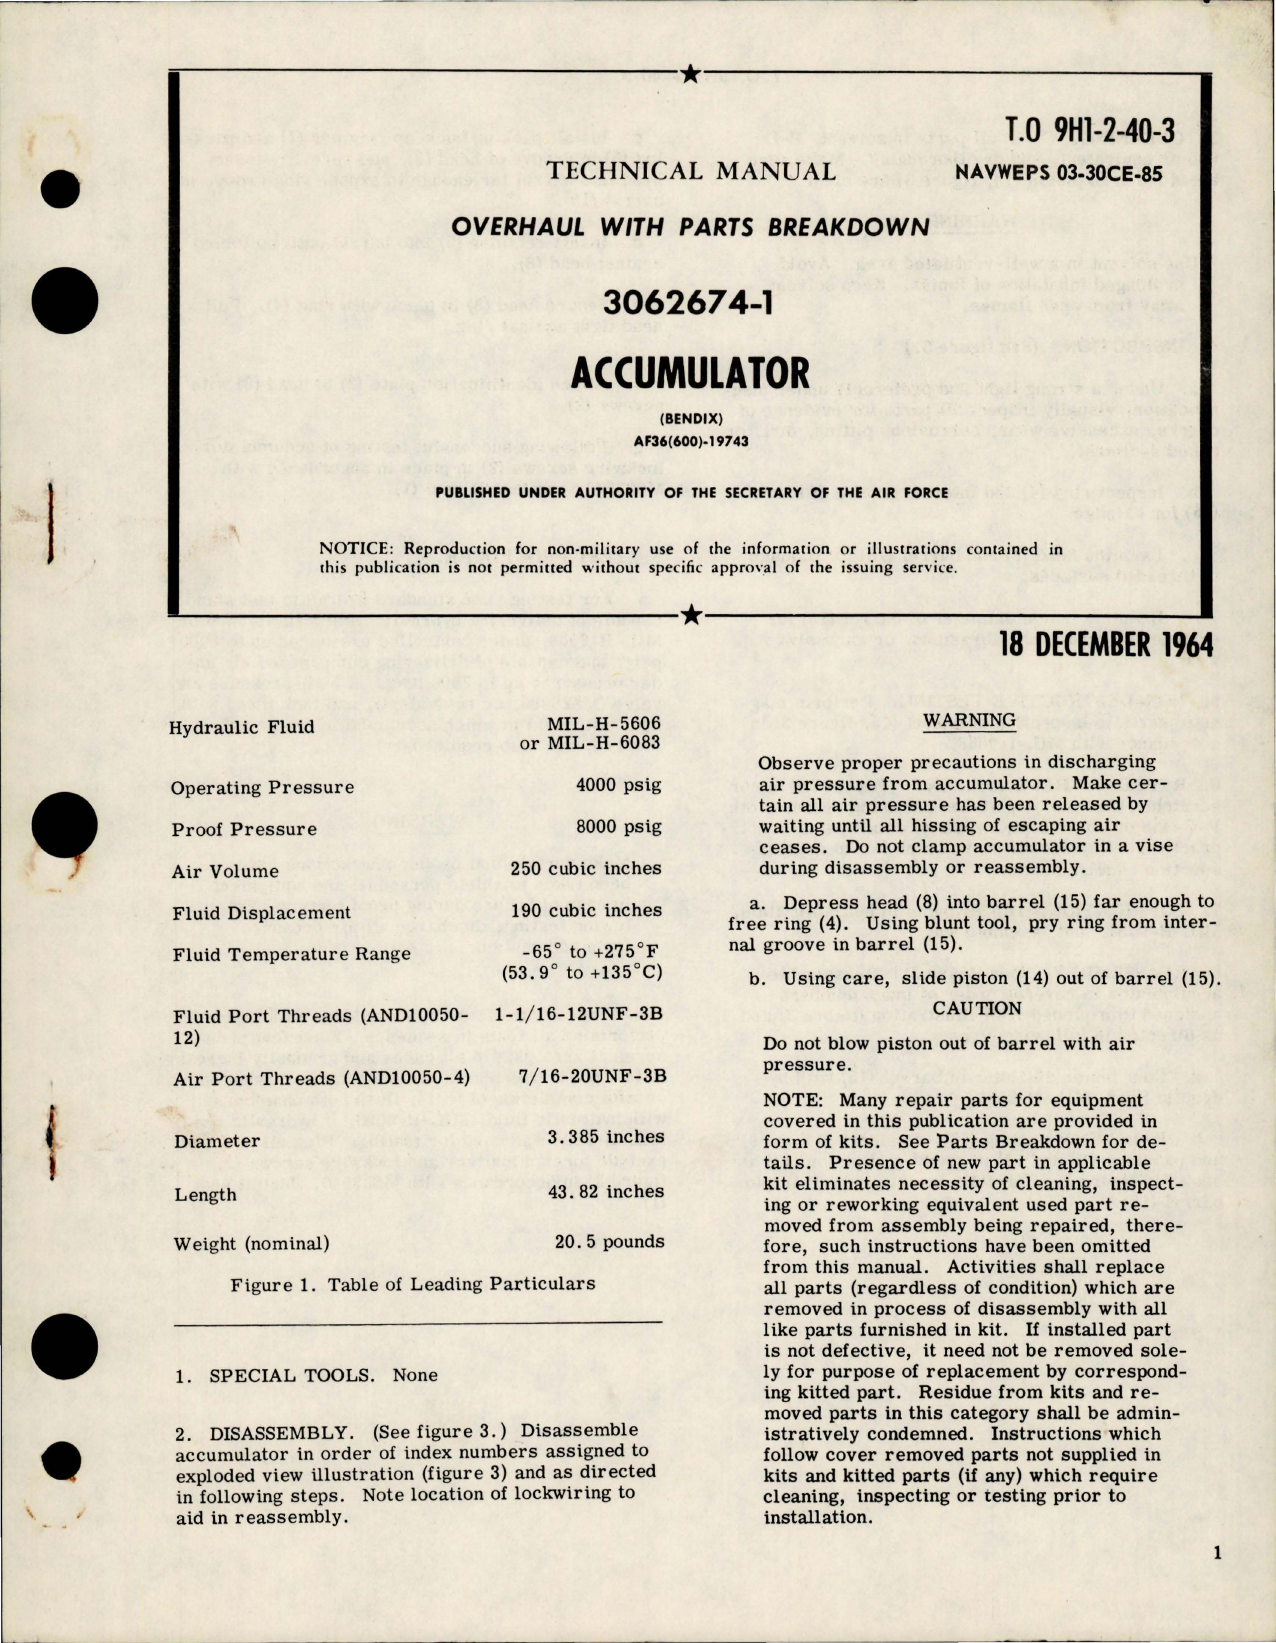 Sample page 1 from AirCorps Library document: Overhaul with Parts Breakdown for Accumulator - 3062674-1